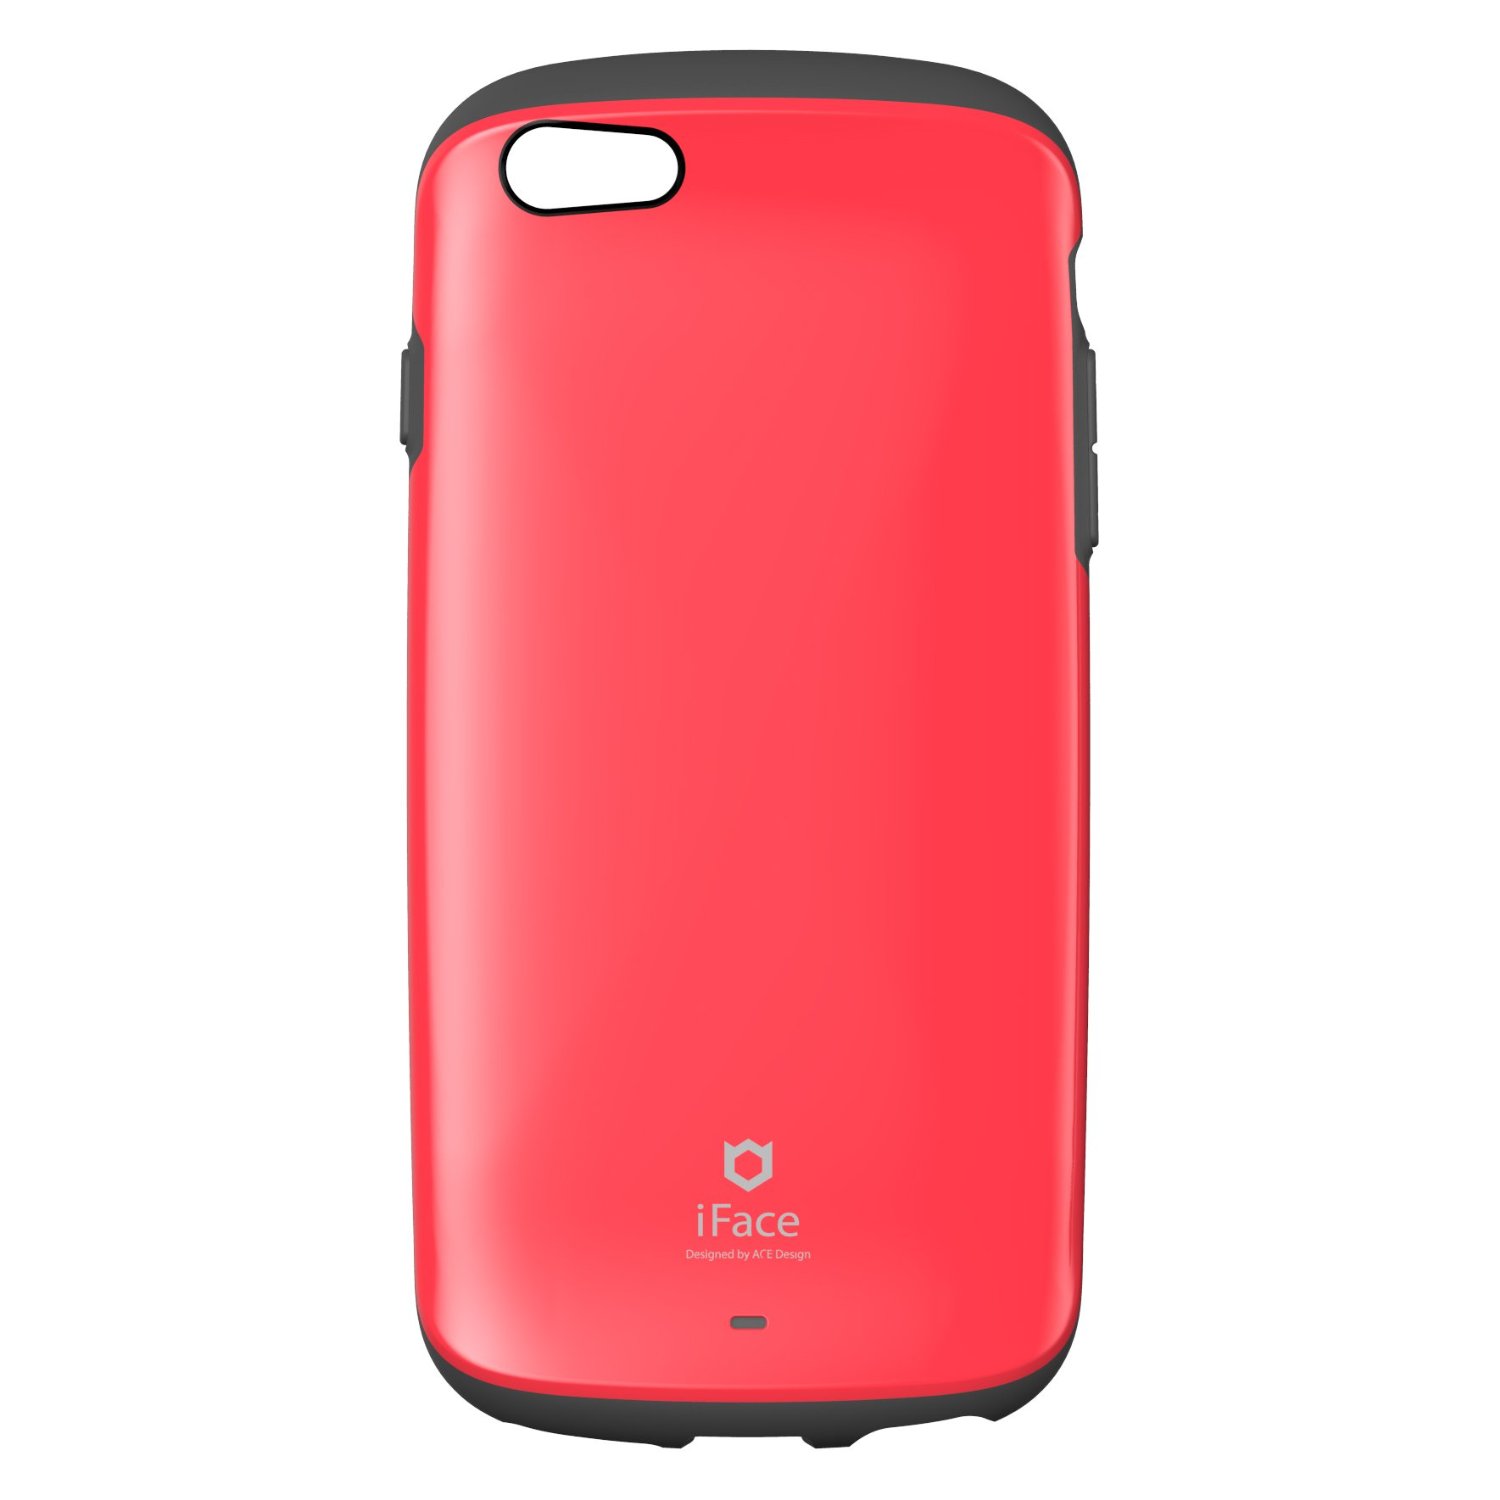 iFace Sensation Case for iPhone 6 Plus - Retail Packaging - Red